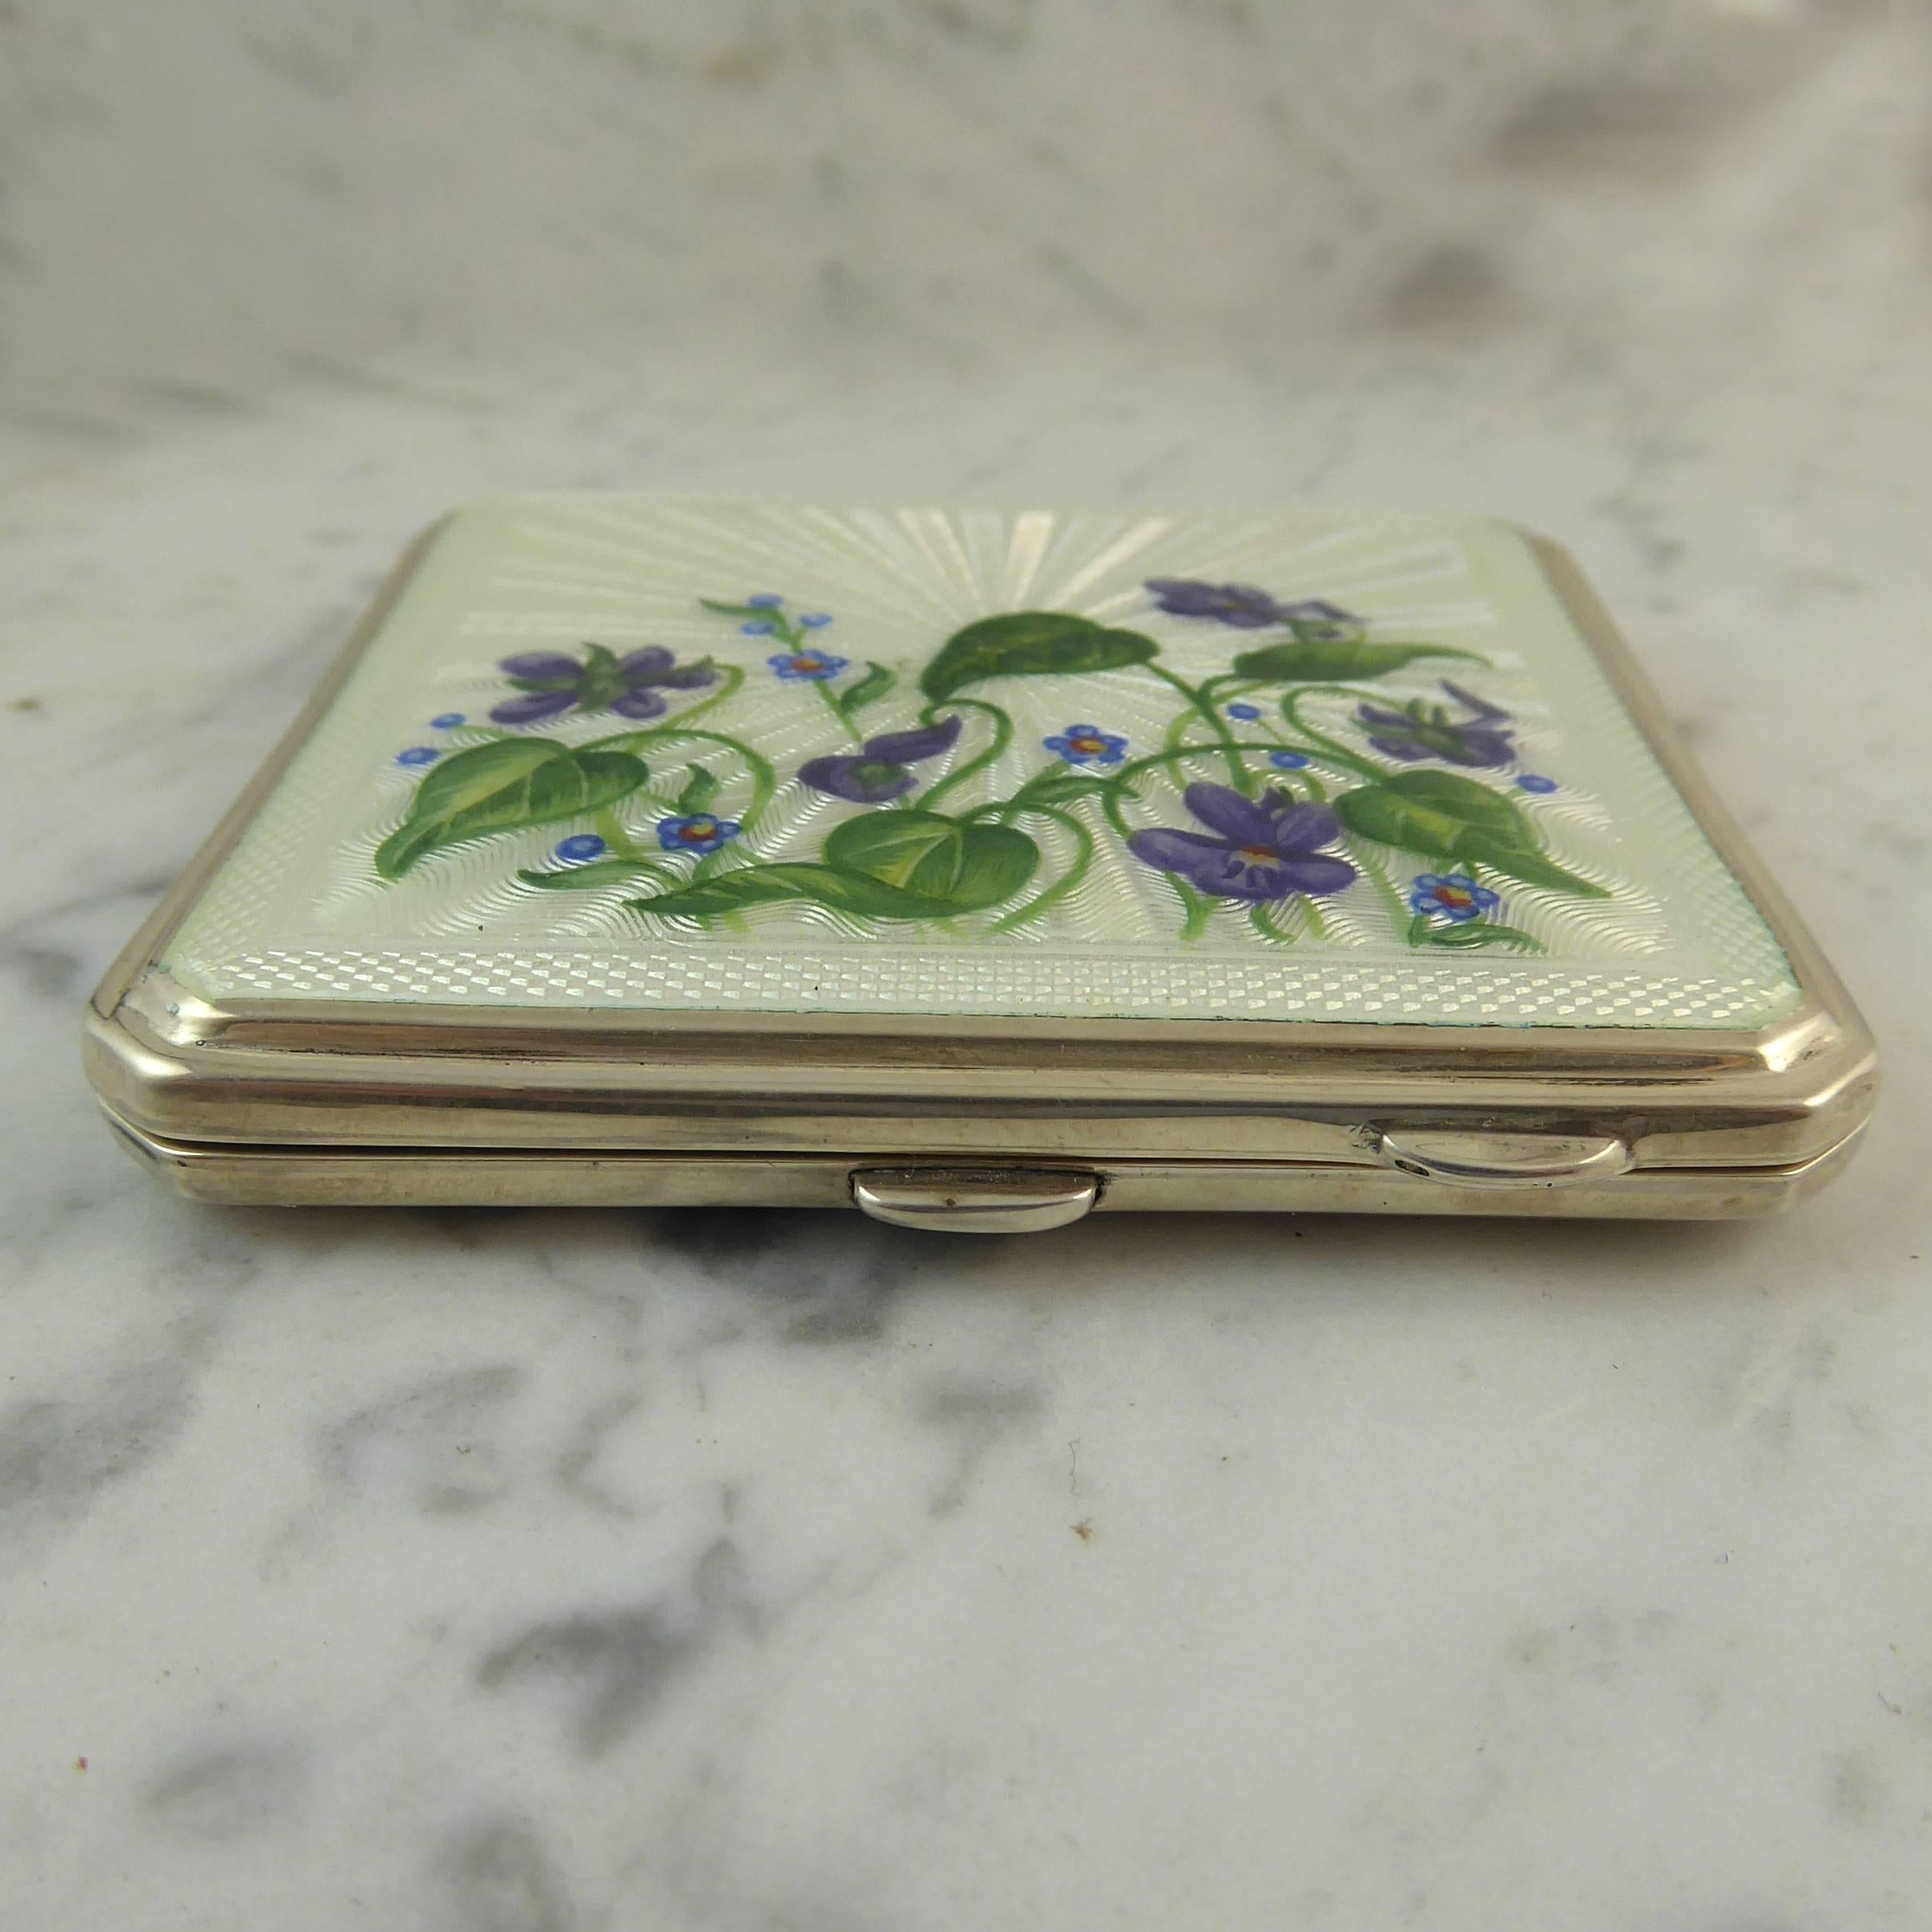 A beautiful vintage powder compact hallmarked in the Coronation Year of Queen Elizabeth II and with the stamp of new monarch incorporated into the hallmark.  The front of the compact is decorated with  spray of Dog Violet and Forget-Me-Nots against